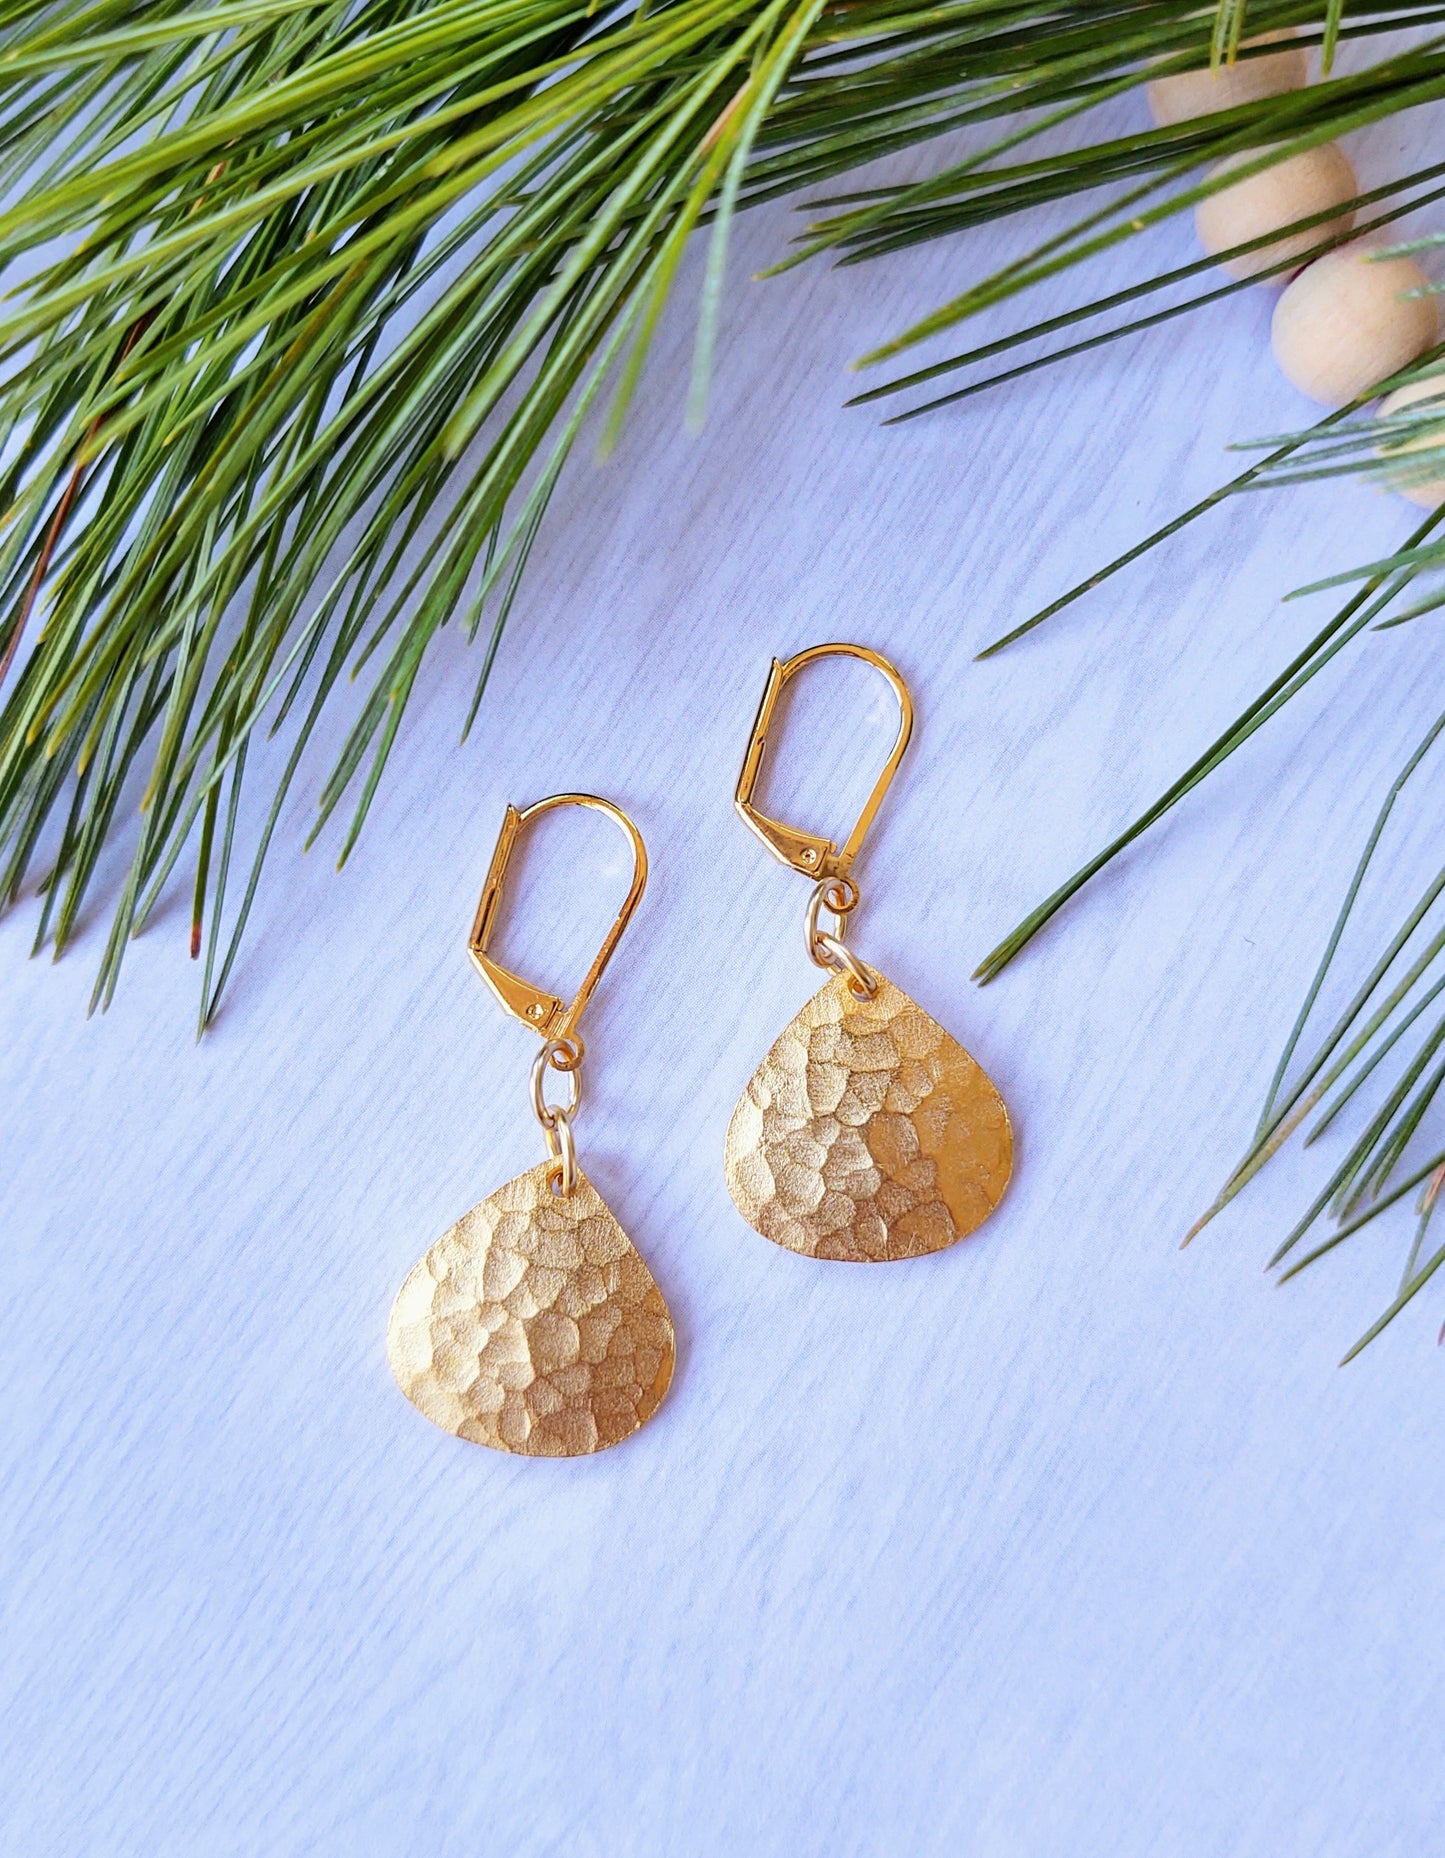 Hammered Gold earrings